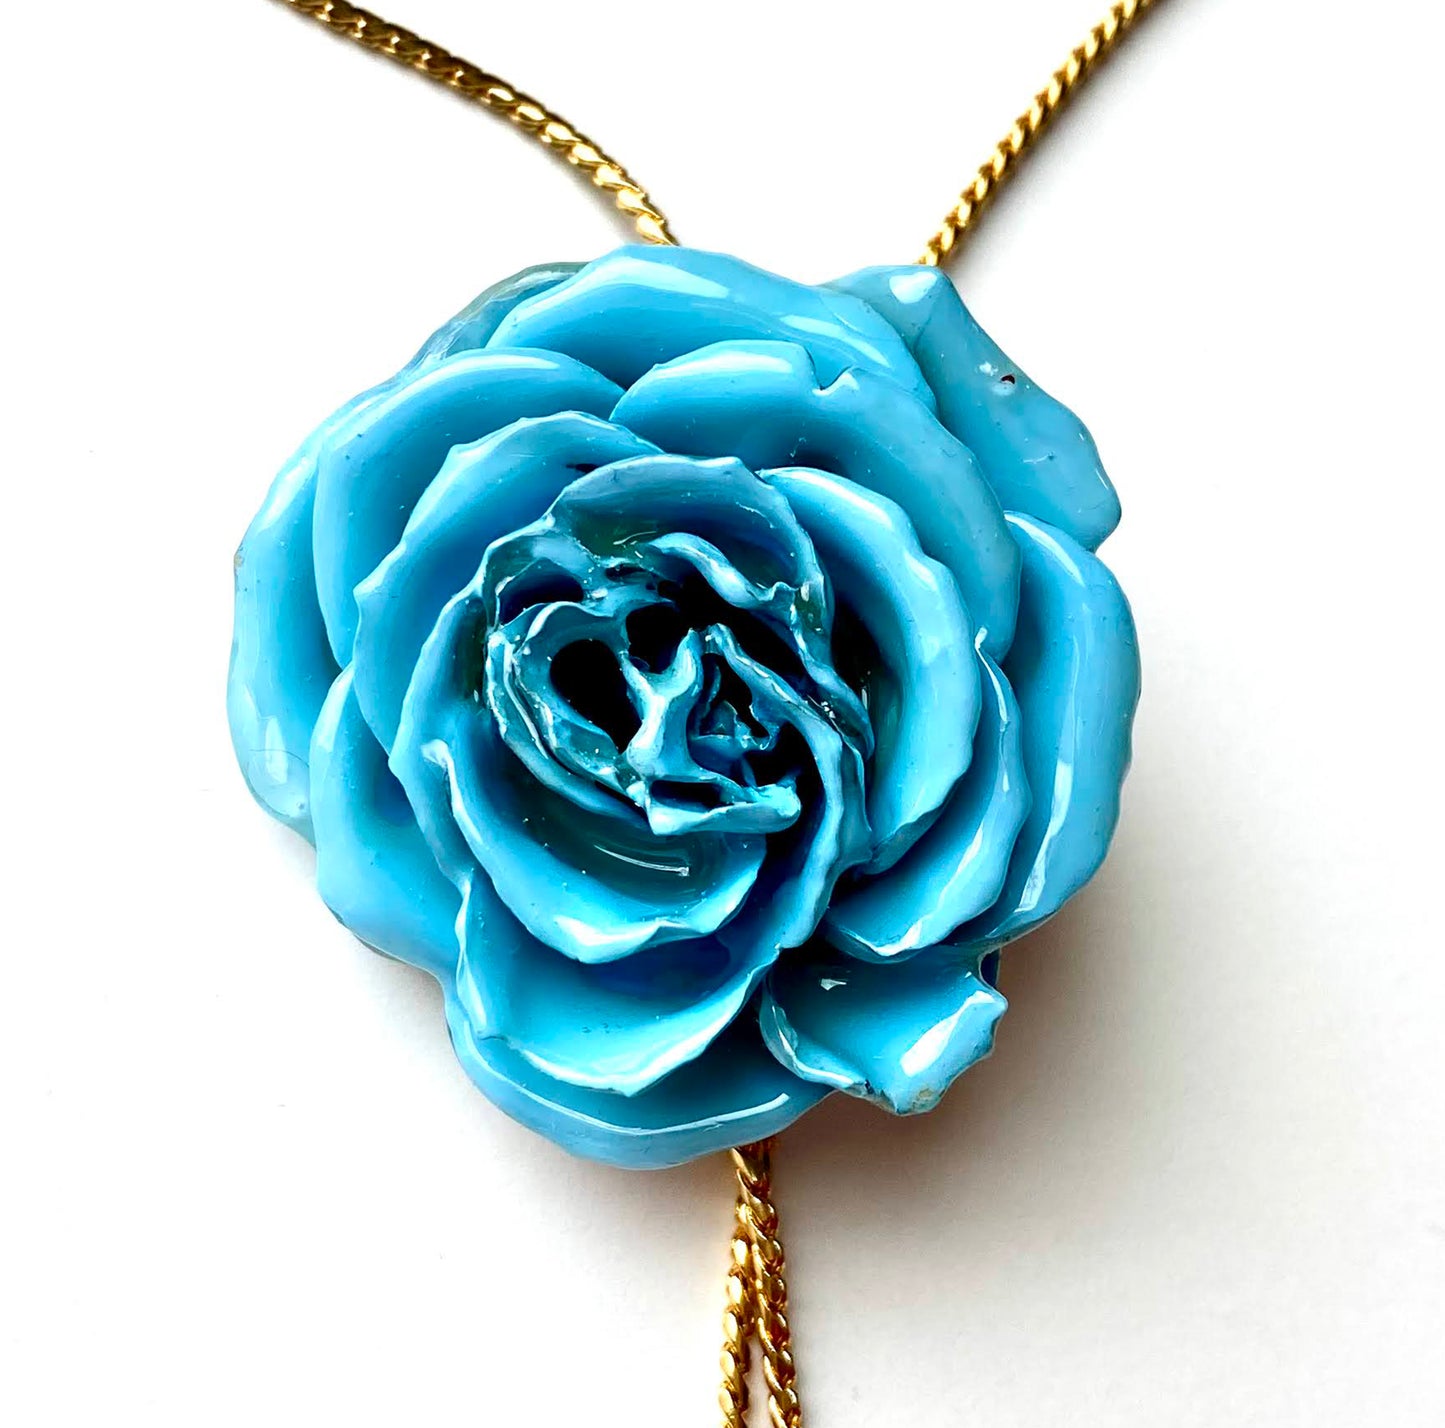 Mini Rose Mini 1.5-2.25 inch Pendant Necklace 18 inch Gold Plated 24K (Baby Blue)